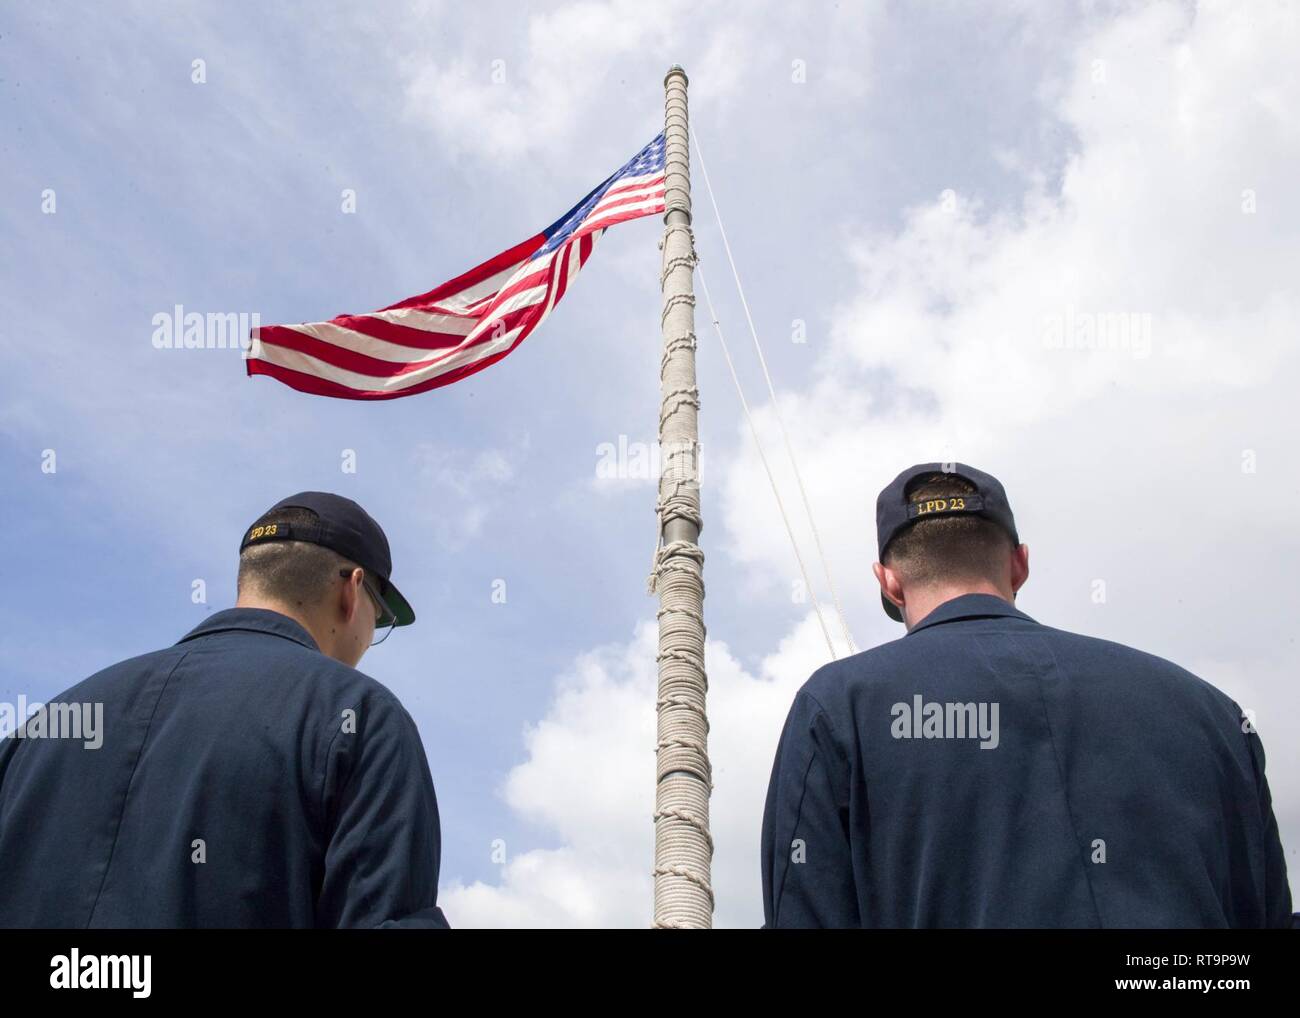 SINGAPORE (Jan. 31, 2019) Aviation Support Equipment Technician 2nd Class Salam Sabah, from Detroit, left, and Aviation Boatswain’s Mate (Fuel) 3rd Class Dylan Wilson, from Hawkins, Texas, prepare to lower the American flag aboard the San Antonio-class amphibious transport dock ship USS Anchorage (LPD 23) while on a deployment of the Essex Amphibious Ready Group (ARG) and 13th Marine Expeditionary Unit (MEU). The Essex ARG/13th MEU is a capable and lethal Navy-Marine Corps team deployed to the 7th fleet area of operations to support regional stability, reassure partners and allies and maintain Stock Photo